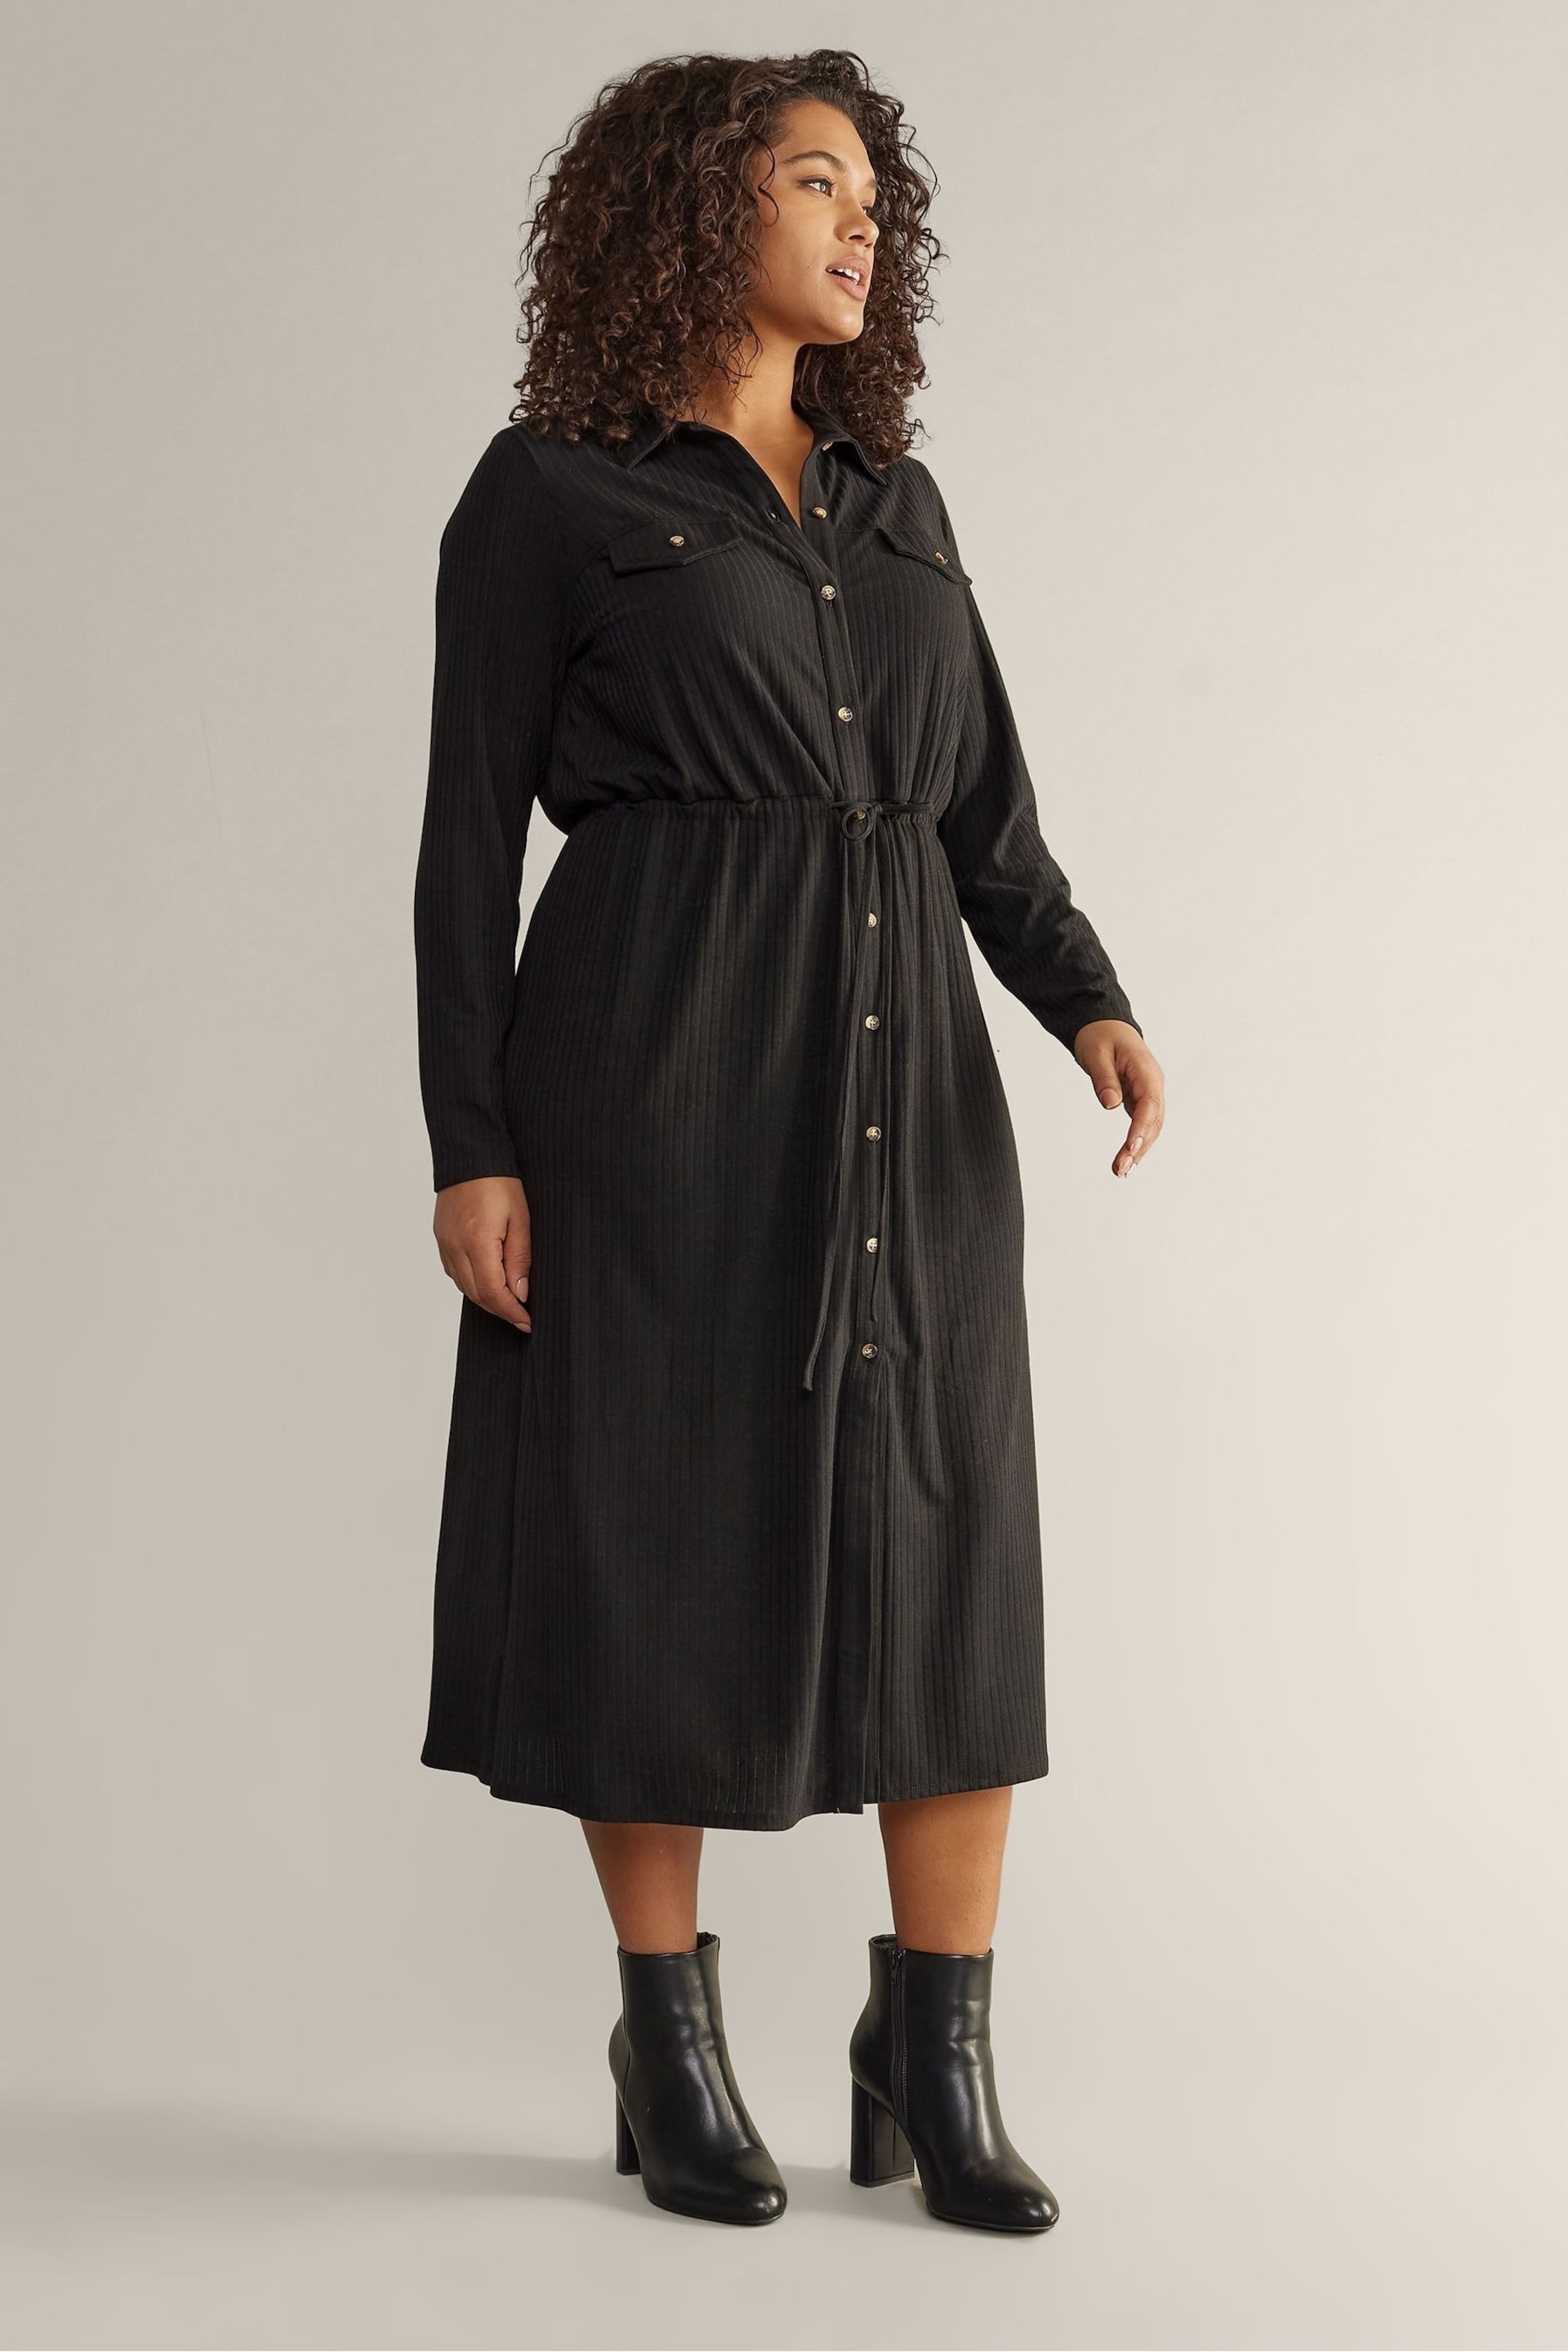 Evans Ribbed Utility Dress - Image 2 of 5